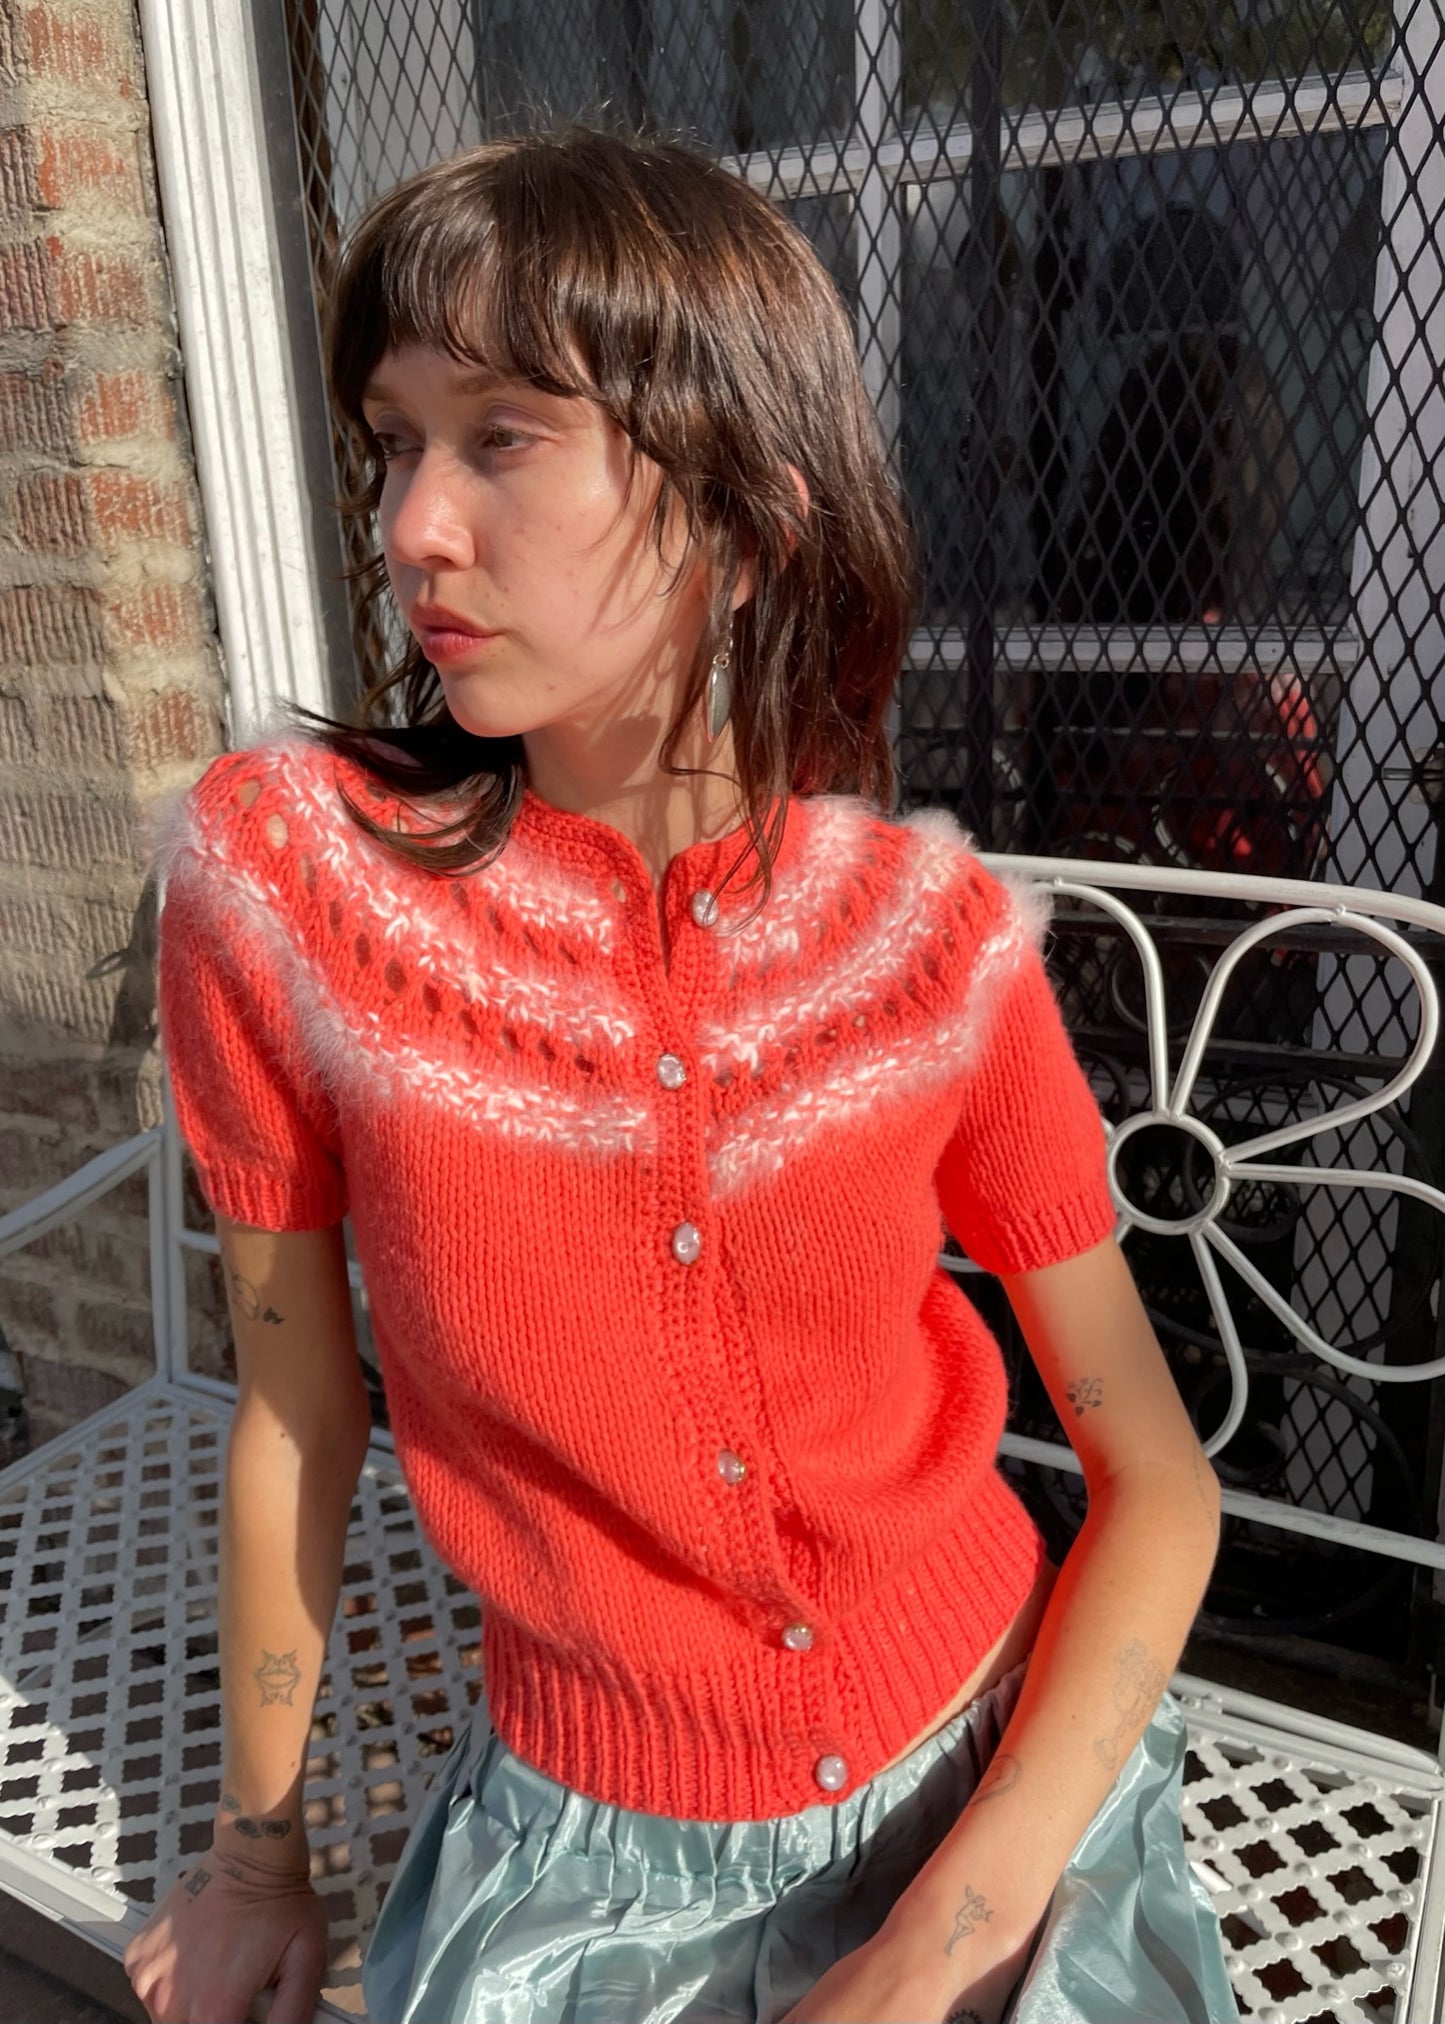 girl wearing red knit top and silvery skirt